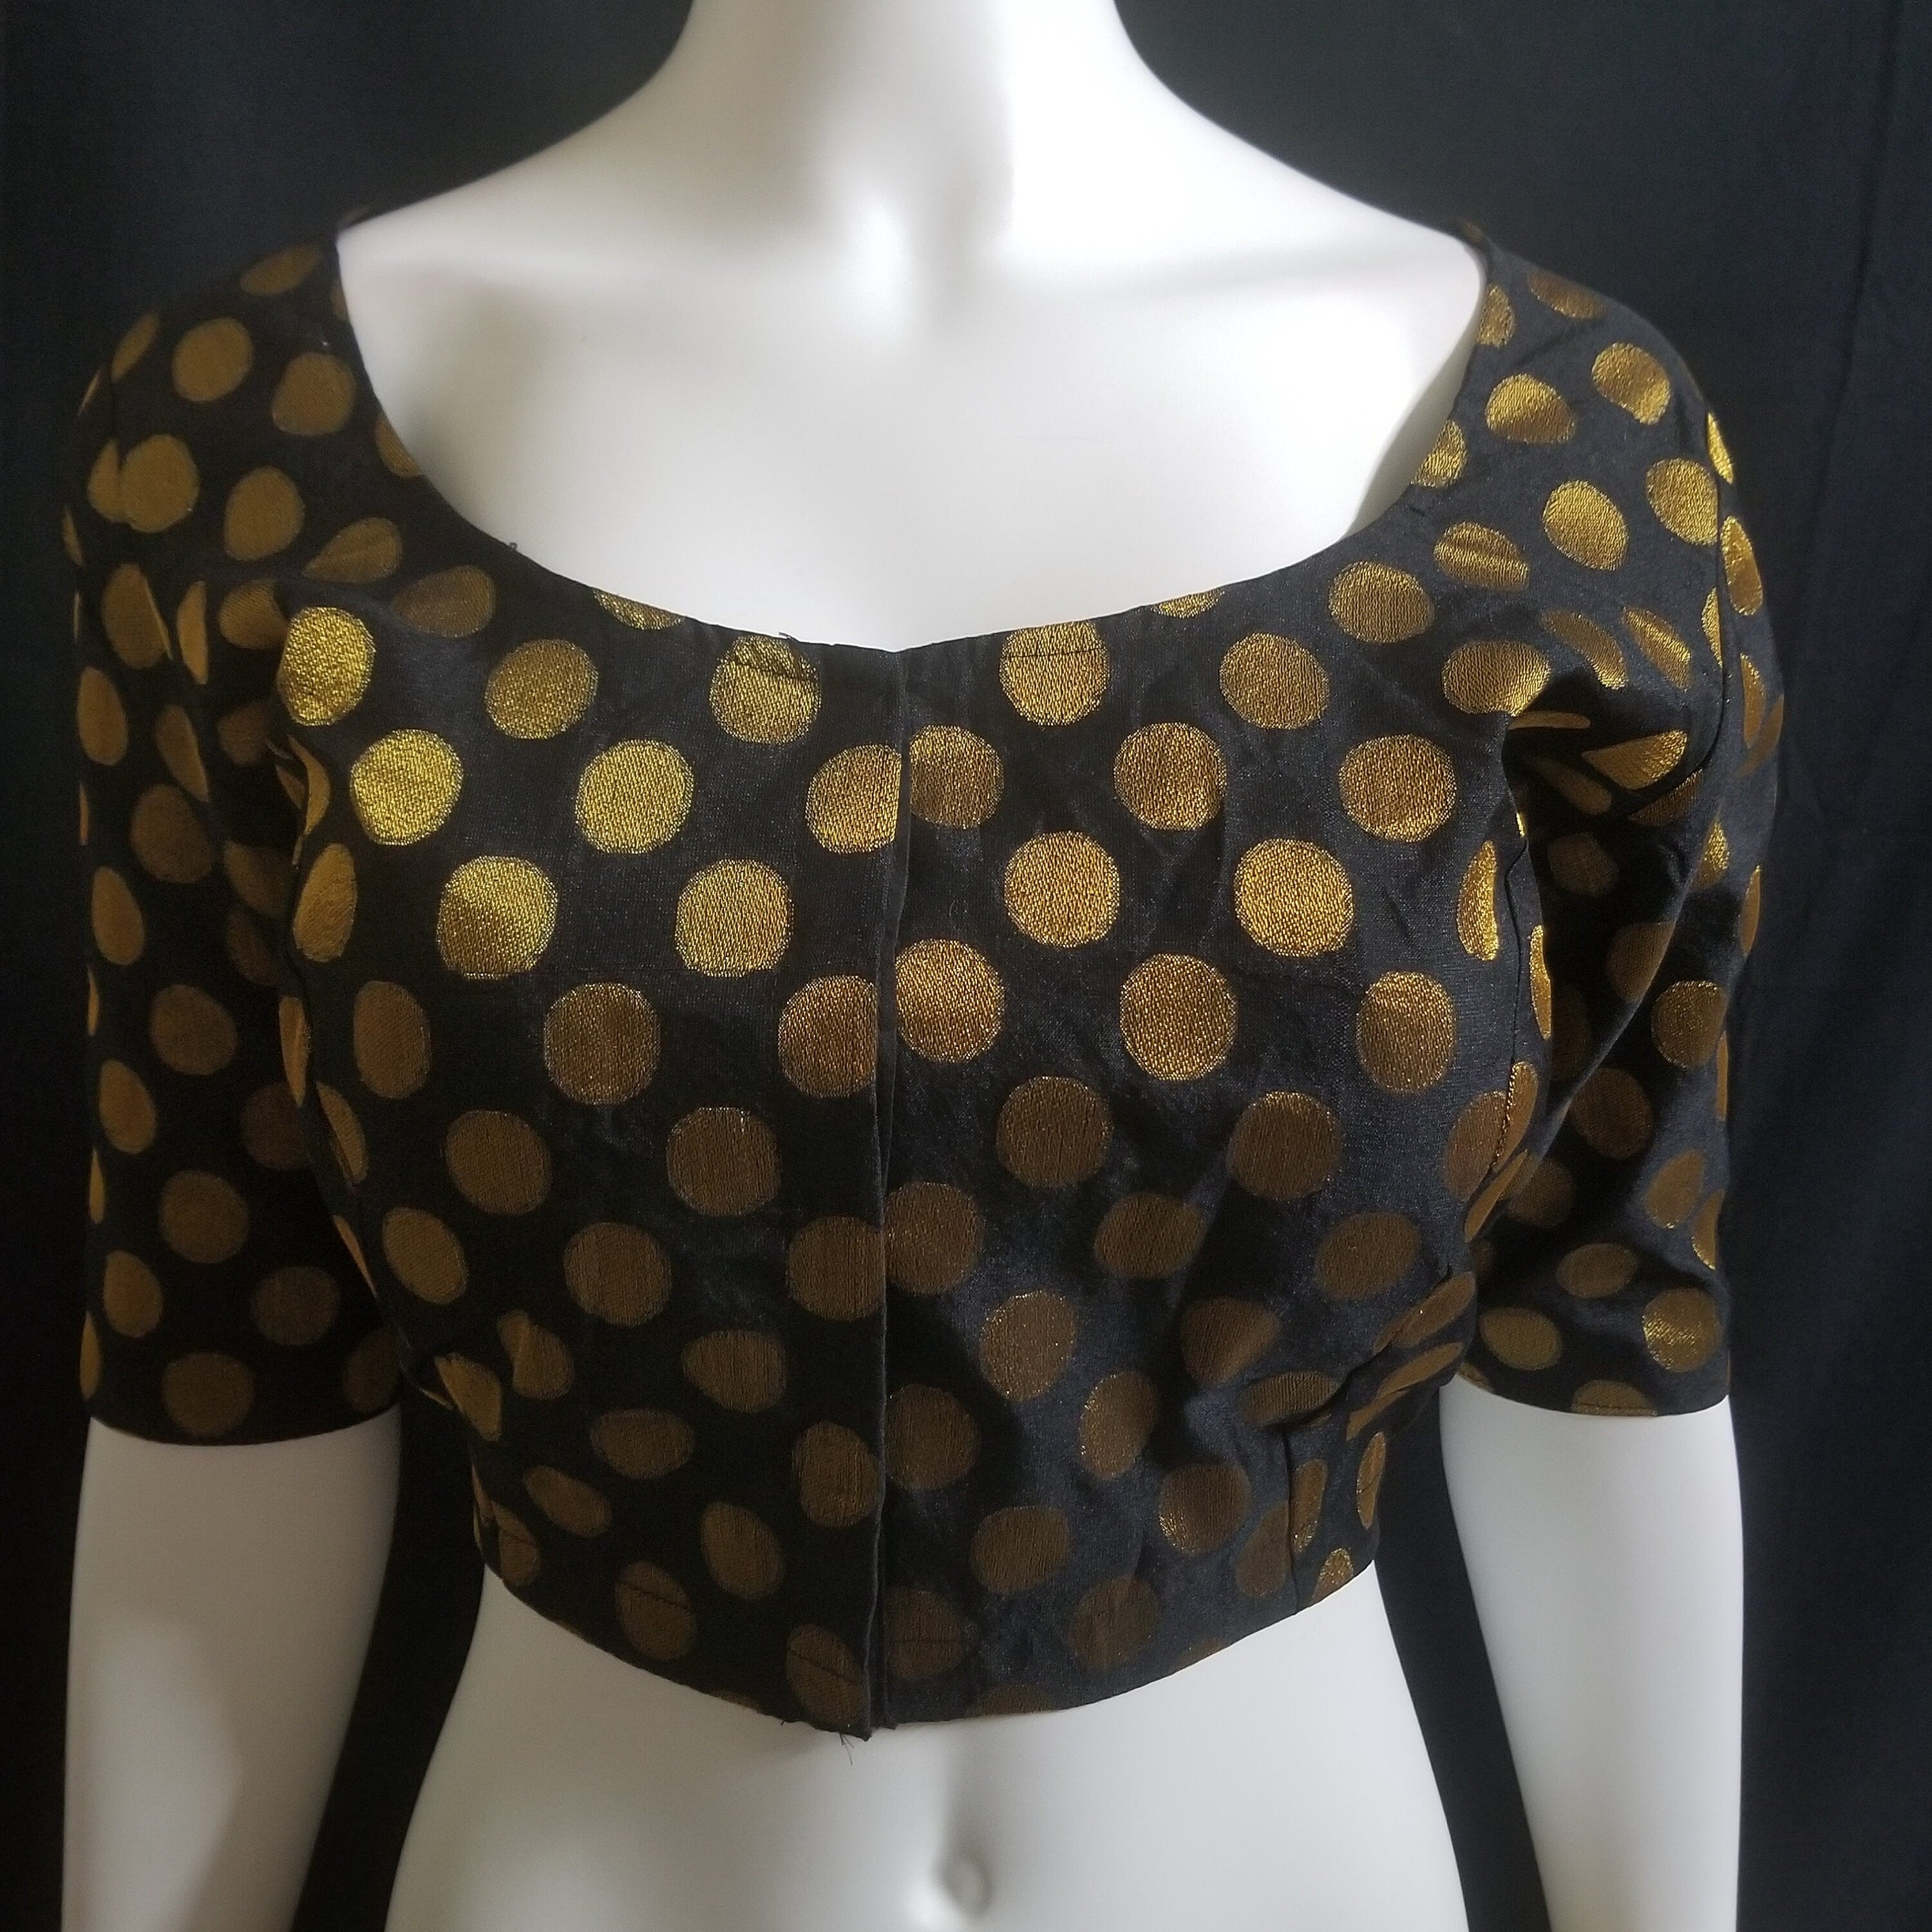 Readymade Saree Blouse - Black with gold butta Silk Blouse - Plus size - Princess cut padded - size 42" (alter 38" to 46")